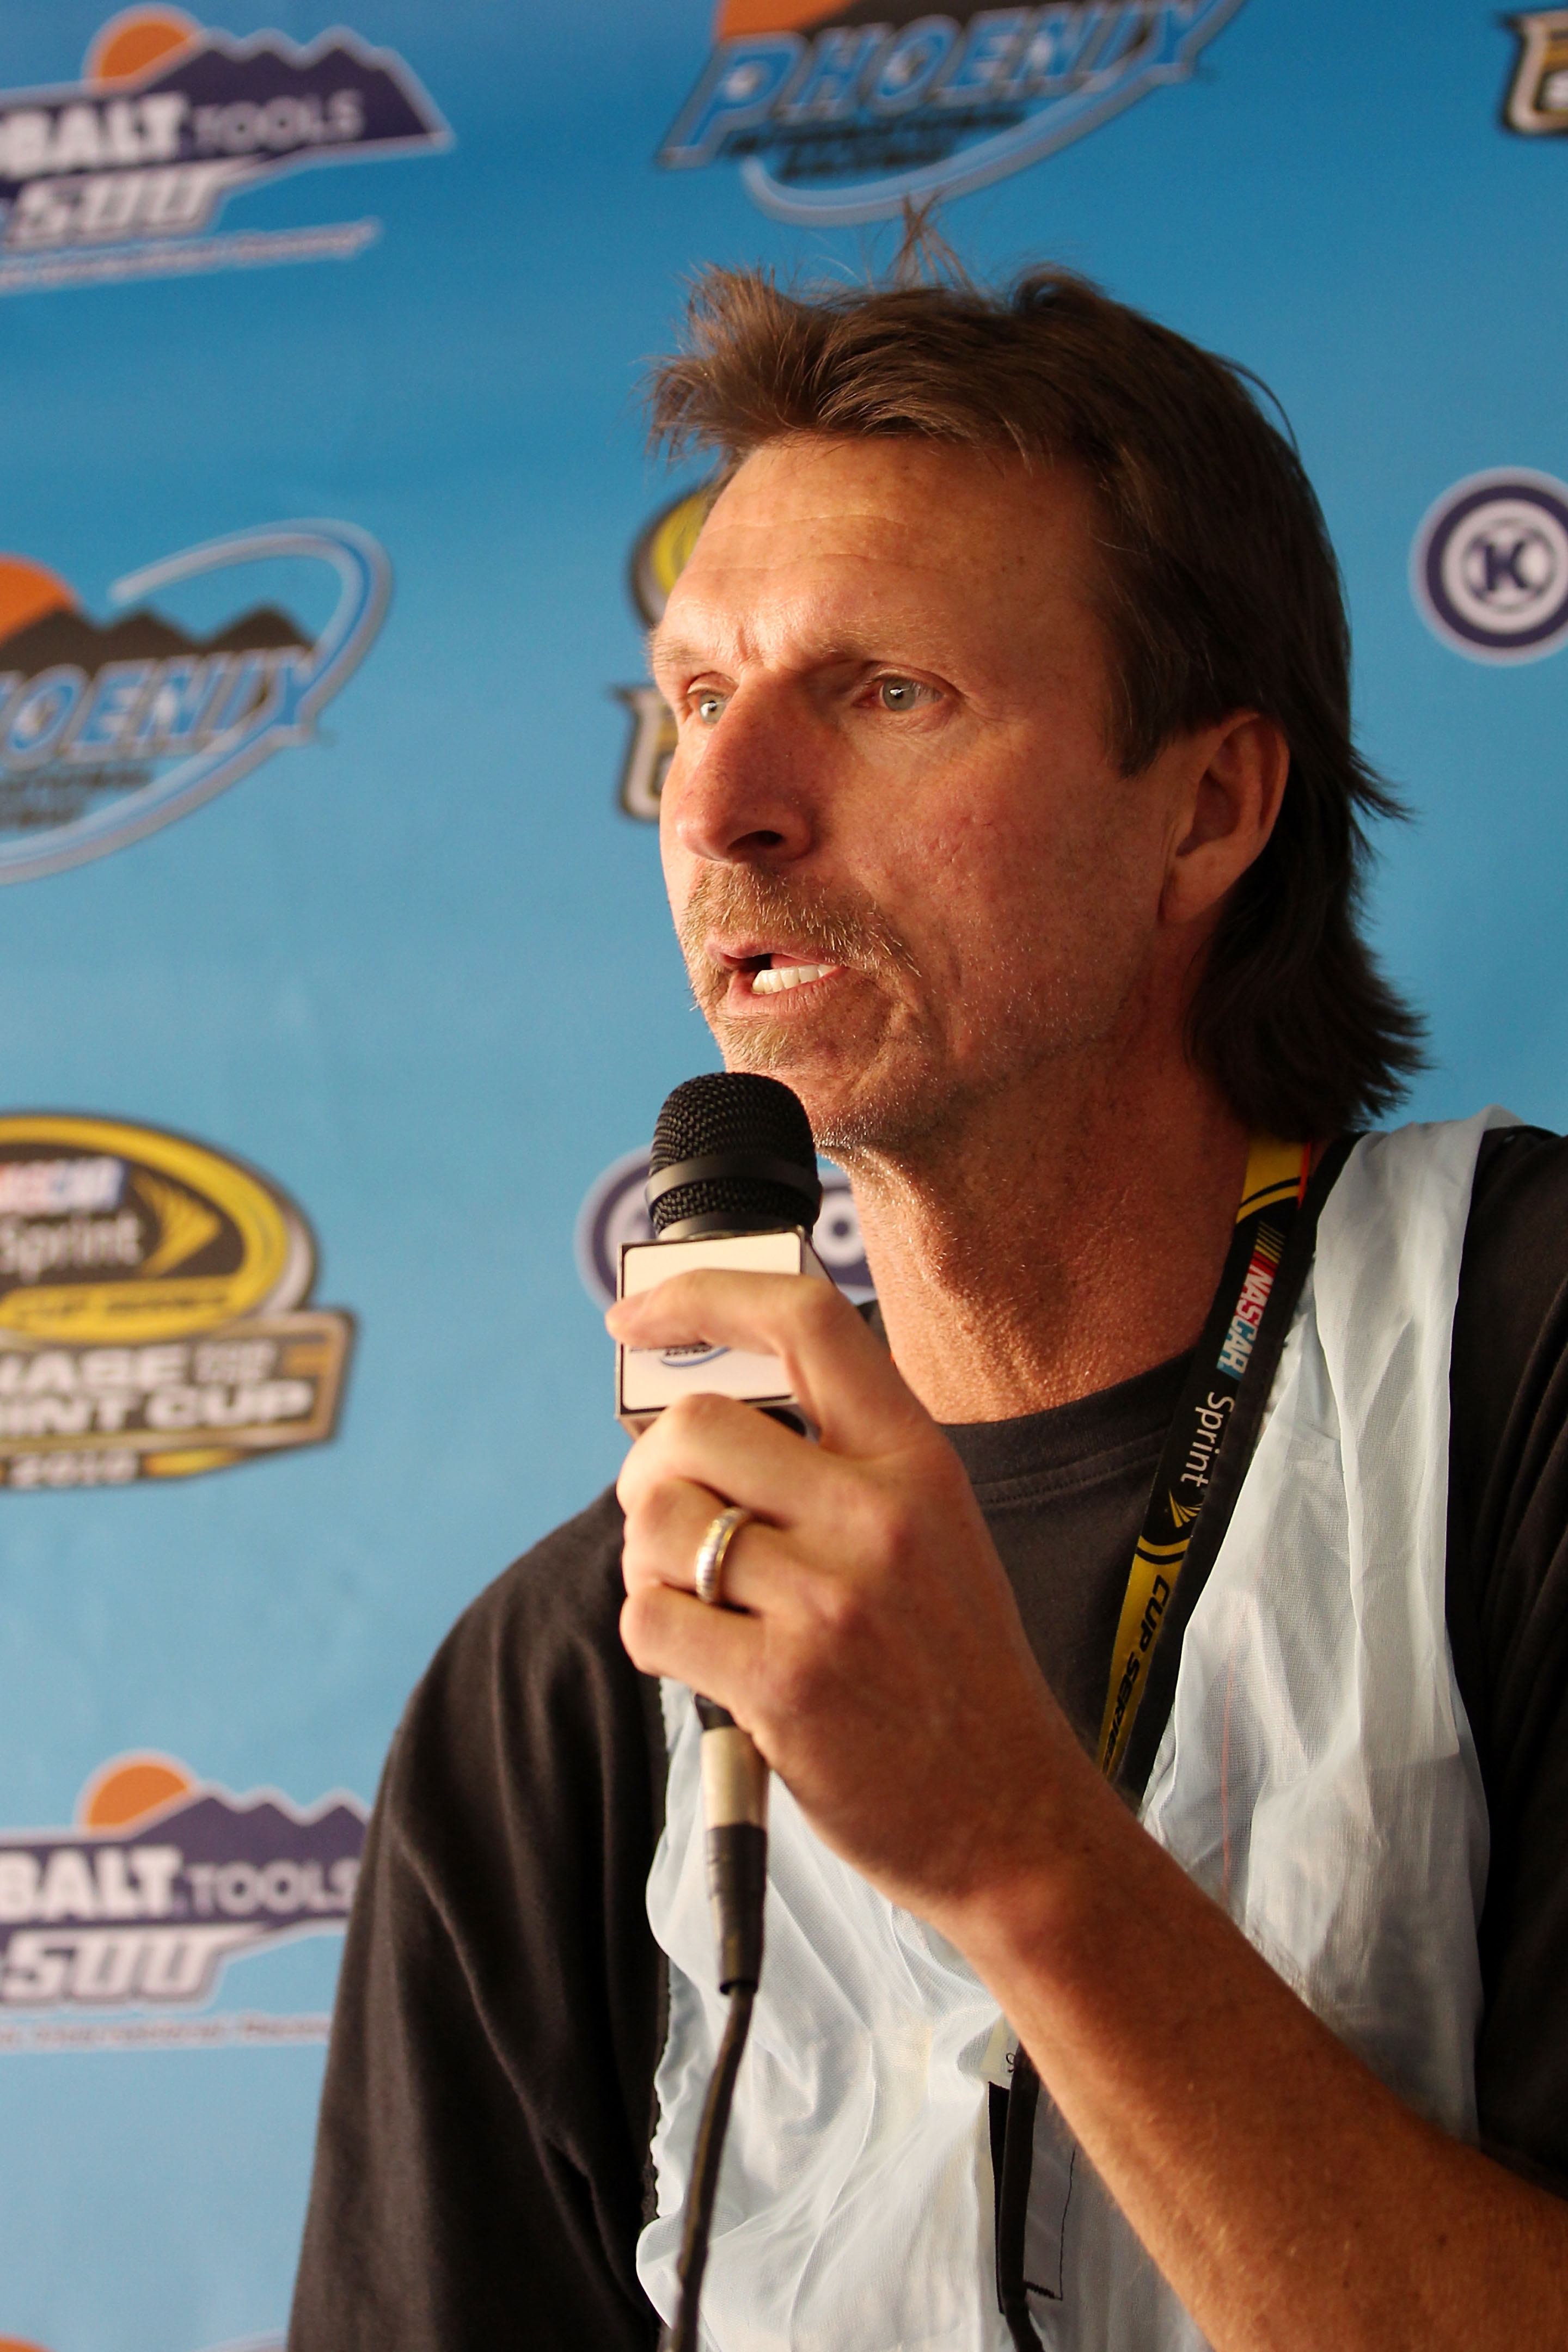 AVONDALE, AZ - NOVEMBER 13:  Former MLB pitcher Randy Johnson speaks at a press conference during practice for the NASCAR Sprint Cup Series Kobalt Tools 500 at Phoenix International Raceway on November 13, 2010 in Avondale, Arizona.  (Photo by Christian P